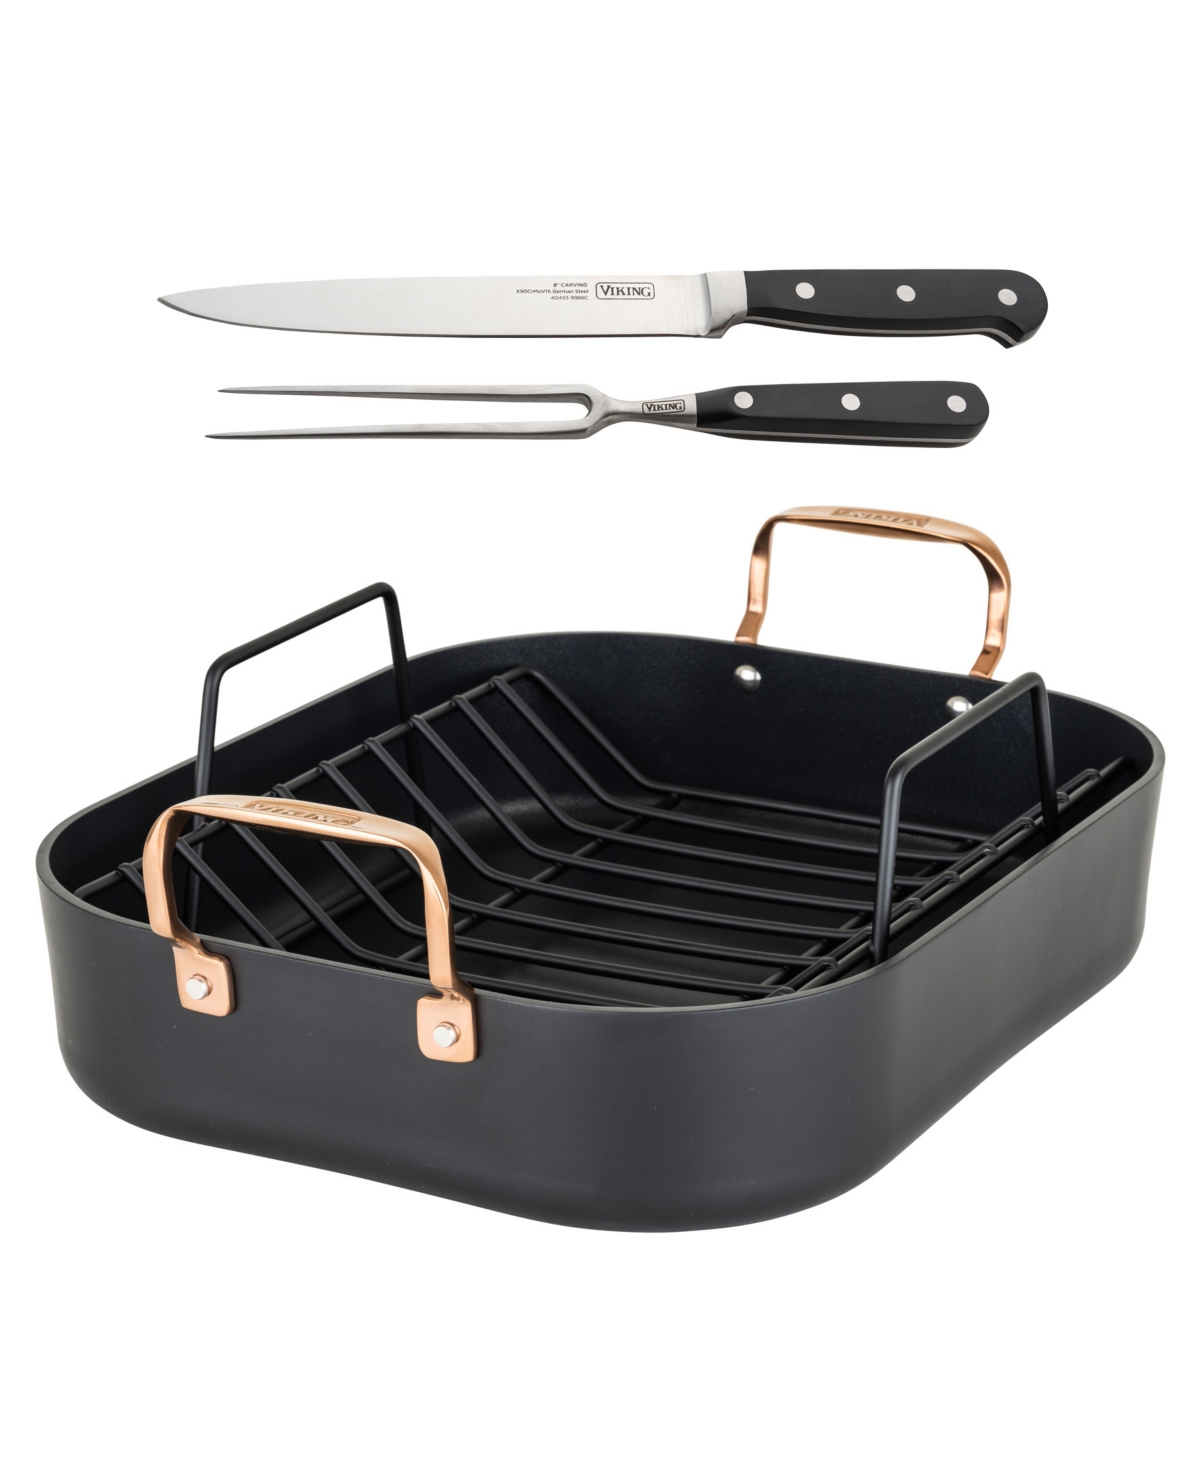 Viking Hard Anodized Non-stick Roaster With Rack And Carving Set, Copper Handles In Dark Gray